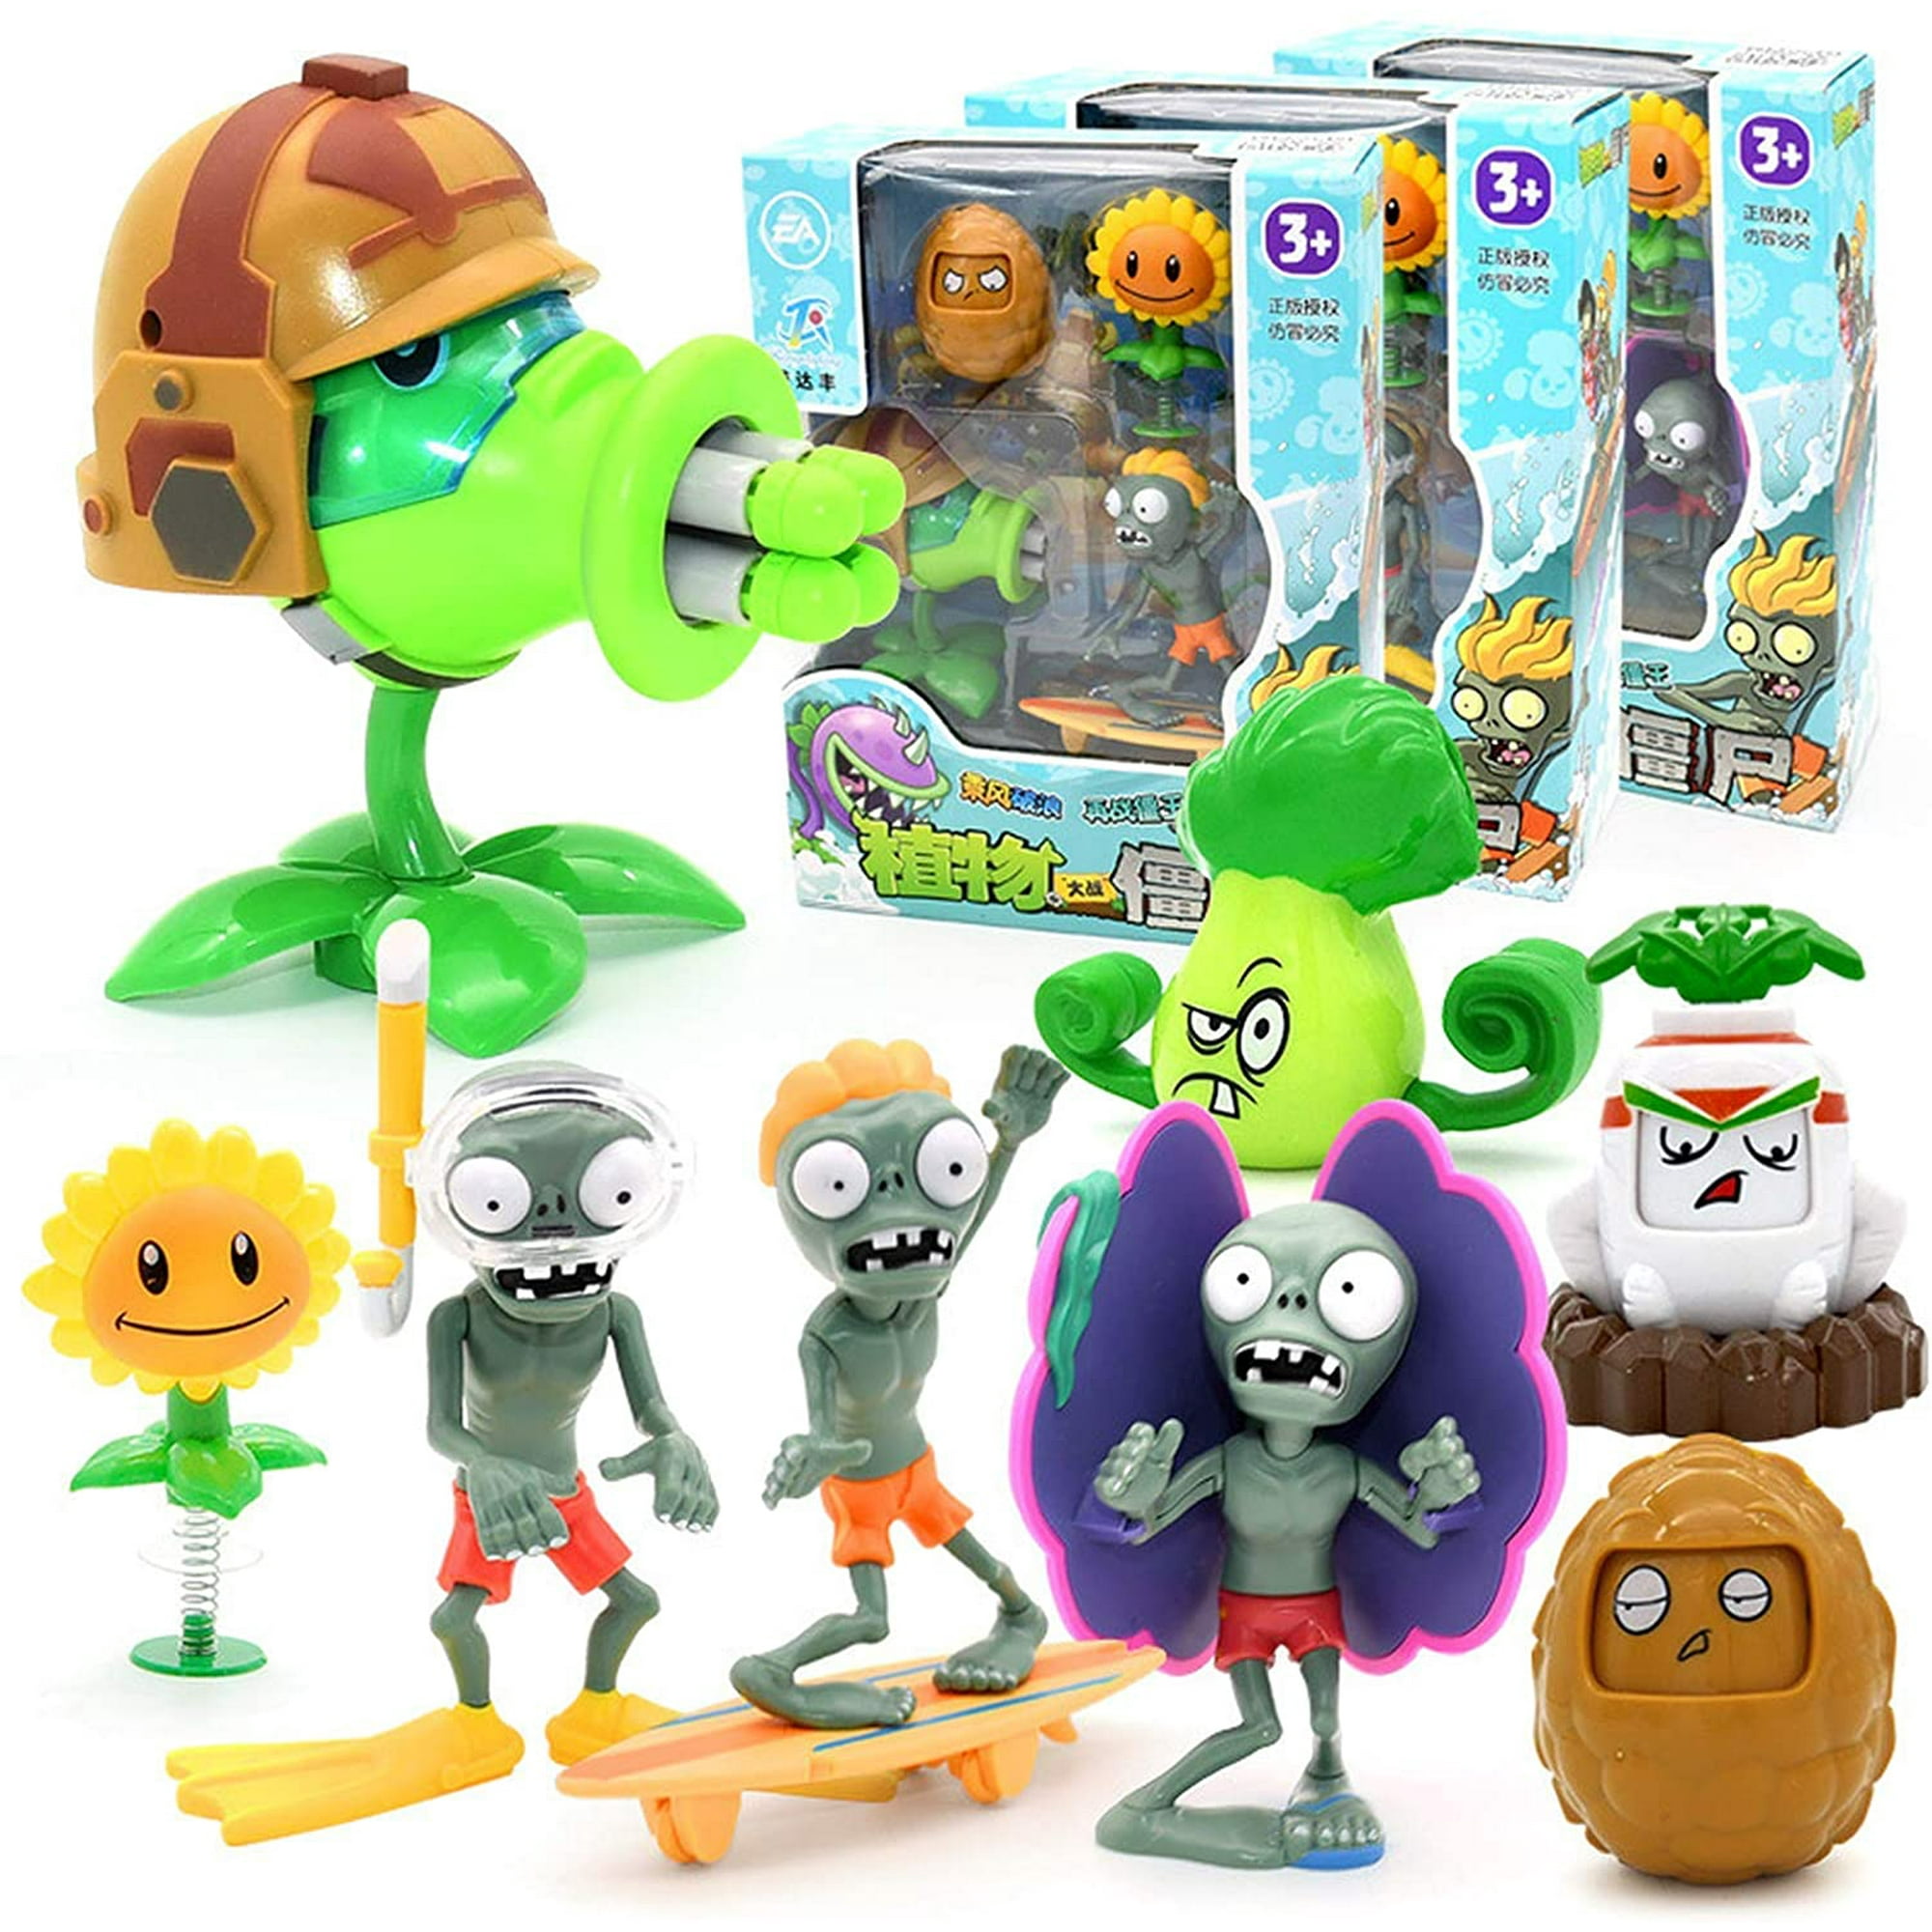 Plants vs Zombies Giant Zombie Pea Shooter Action Figure Gifts Toys Children 